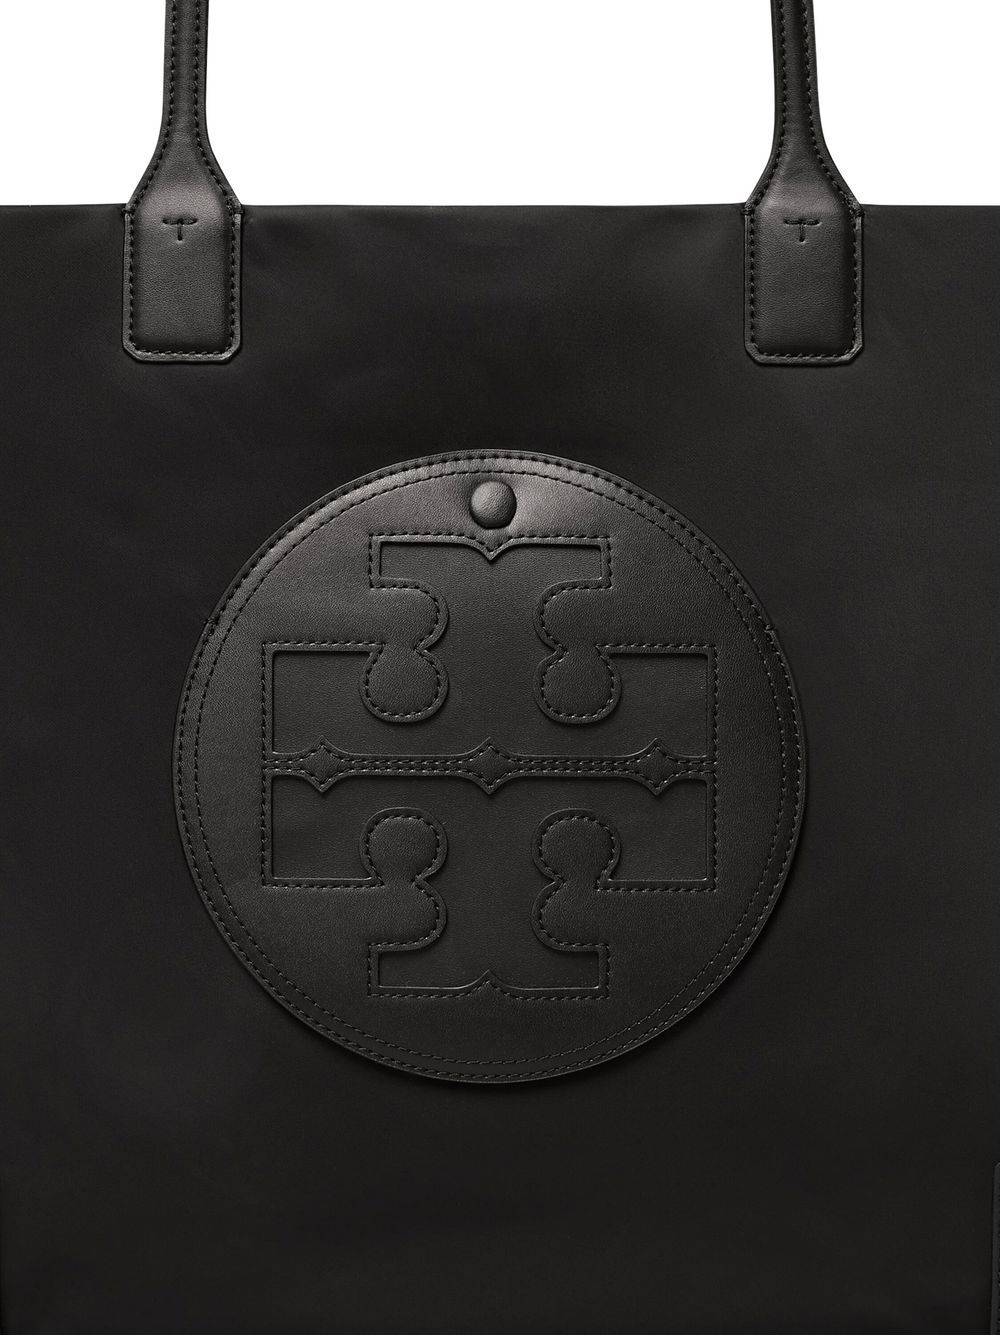 ecycled nylon, recycled polyester, artificial leather, embossed logo to the front, two top handles and open top.